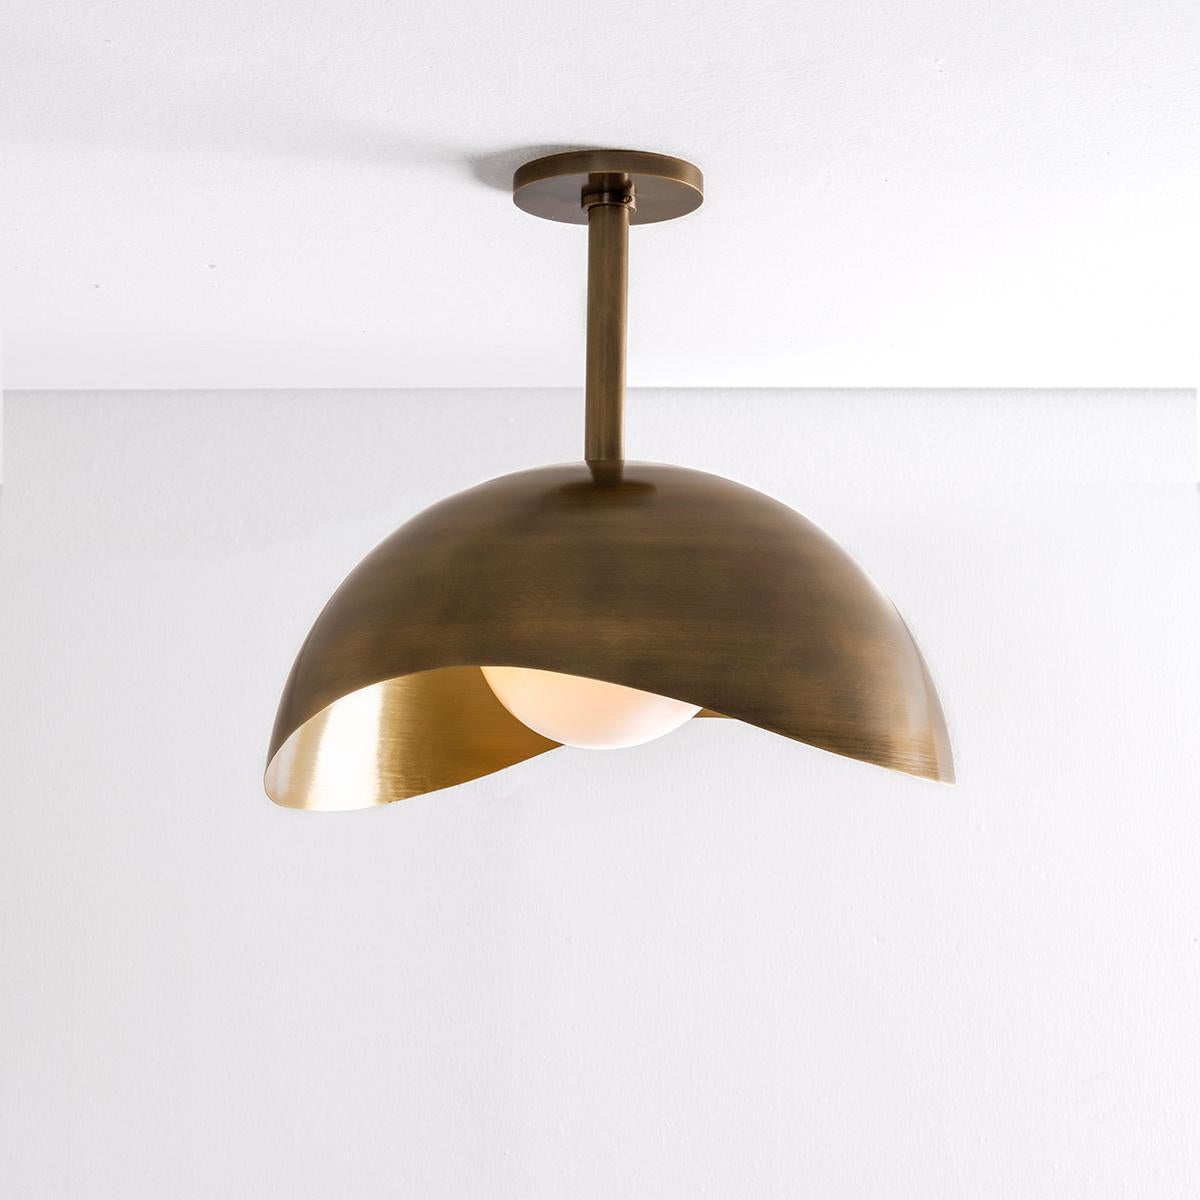 The Perla Grande features an organic brass shell nestling our sfera glass handblown in Murano. Shown in a two tone finish with a bronzo nuvolato exterior and satin brass interior. See our Perla flushmount and wall light for the smaller version.